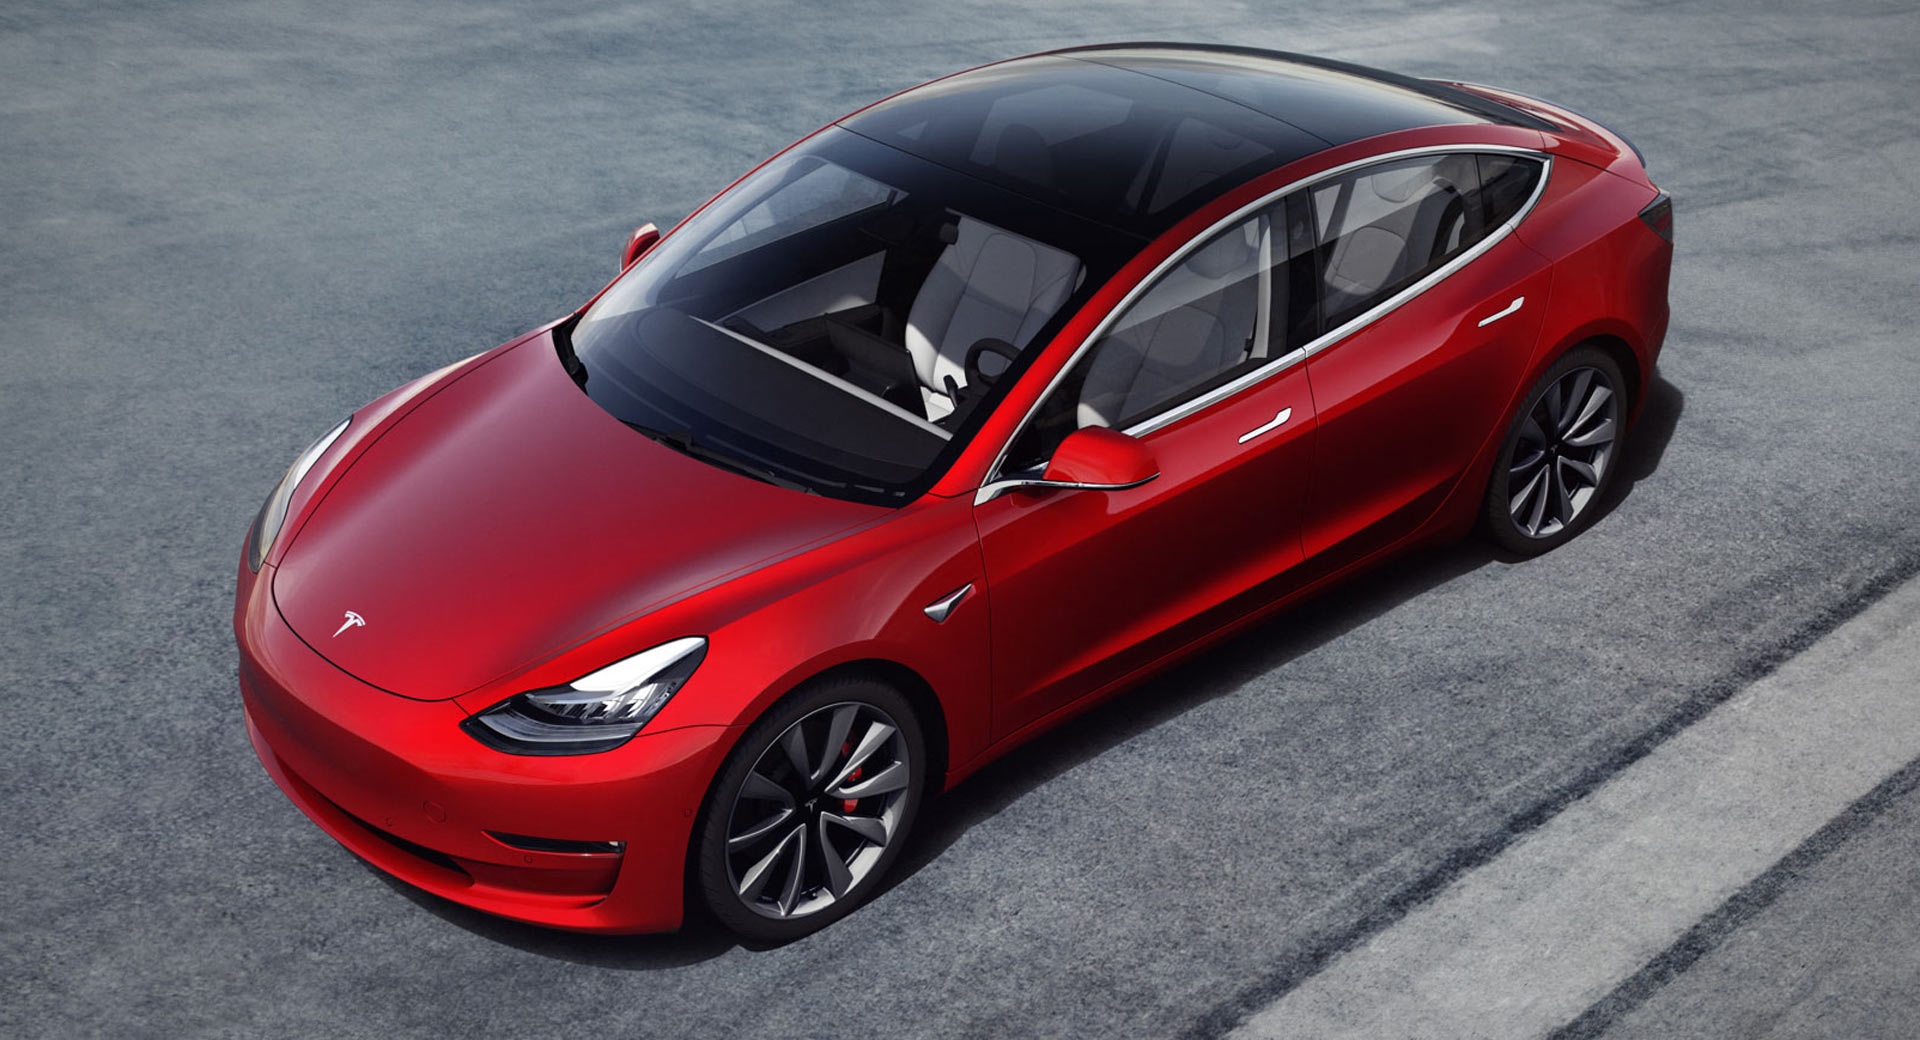 uitzondering jogger Varken Tesla Model 3 Could Get A 100 kWh Battery And Ludicrous Mode | Carscoops